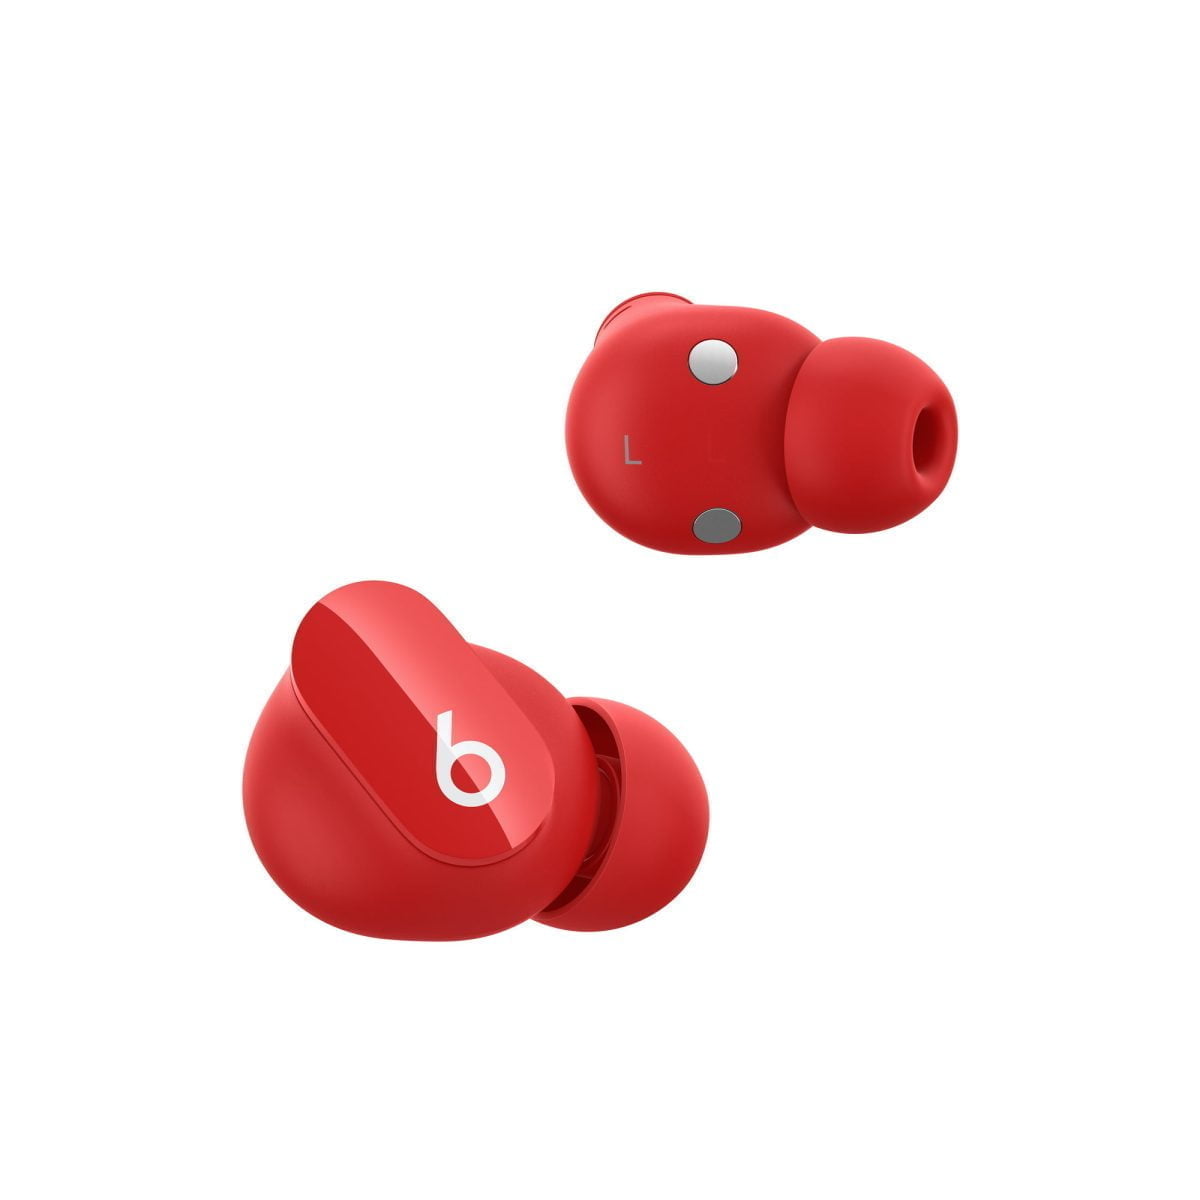 Mj503 Av3 V4 Apple &Lt;H1 Data-Autom=&Quot;Sectiontitle&Quot;&Gt;Beats Studio Buds – True Wireless Noise Cancelling Earphones – Beats Red&Lt;/H1&Gt; &Lt;Div Class=&Quot;Rc-Pdsection-Mainpanel Column Large-9 Small-12&Quot;&Gt; &Lt;Div Class=&Quot;Para-List&Quot;&Gt; Custom Acoustic Platform Delivers Powerful, Balanced Sound &Lt;/Div&Gt; &Lt;Div Class=&Quot;Para-List&Quot;&Gt; Active Noise Cancelling (Anc) Blocks External Noise For Immersive Listening &Lt;/Div&Gt; &Lt;Div Class=&Quot;Para-List&Quot;&Gt; Easily Switch To Transparency Mode To Hear The World Around You &Lt;/Div&Gt; &Lt;Div Class=&Quot;Para-List&Quot;&Gt; Simple One-Touch Pairing For Both Apple&Lt;Sup&Gt;6&Lt;/Sup&Gt; And Android&Lt;Sup&Gt;7&Lt;/Sup&Gt; Devices &Lt;/Div&Gt; &Lt;Div Class=&Quot;Para-List&Quot;&Gt; High-Quality Call Performance And Voice Assistant Interaction Via Dual Beamforming Mics &Lt;/Div&Gt; &Lt;Div Class=&Quot;Para-List&Quot;&Gt; Ipx4-Rated Sweat And Water Resistant Wireless Earbuds&Lt;Sup&Gt;4&Lt;/Sup&Gt; &Lt;/Div&Gt; &Lt;Div Class=&Quot;Para-List&Quot;&Gt; Three Soft Eartip Sizes For A Stable And Comfortable Fit While Ensuring An Optimal Acoustic Seal &Lt;/Div&Gt; &Lt;Div Class=&Quot;Para-List&Quot;&Gt; Up To 8 Hours Of Listening Time&Lt;Sup&Gt;1&Lt;/Sup&Gt; (Up To 24 Hours Combined With Pocket-Sized Charging Case)&Lt;Sup&Gt;2&Lt;/Sup&Gt; &Lt;/Div&Gt; &Lt;Div Class=&Quot;Para-List&Quot;&Gt; Activate Siri Hands-Free Just By Saying “Hey Siri”&Lt;Sup&Gt;8&Lt;/Sup&Gt; &Lt;/Div&Gt; &Lt;Div Class=&Quot;Para-List&Quot;&Gt; Industry-Leading Class 1 Bluetooth For Extended Range And Fewer Dropouts &Lt;/Div&Gt; &Lt;Div Class=&Quot;Para-List As-Pdp-Lastparalist&Quot;&Gt; Usb-C Universal Charging &Lt;/Div&Gt; &Lt;/Div&Gt; Beats Studio Buds Red Beats Studio Buds – True Wireless Noise Cancelling Earphones – Beats Red